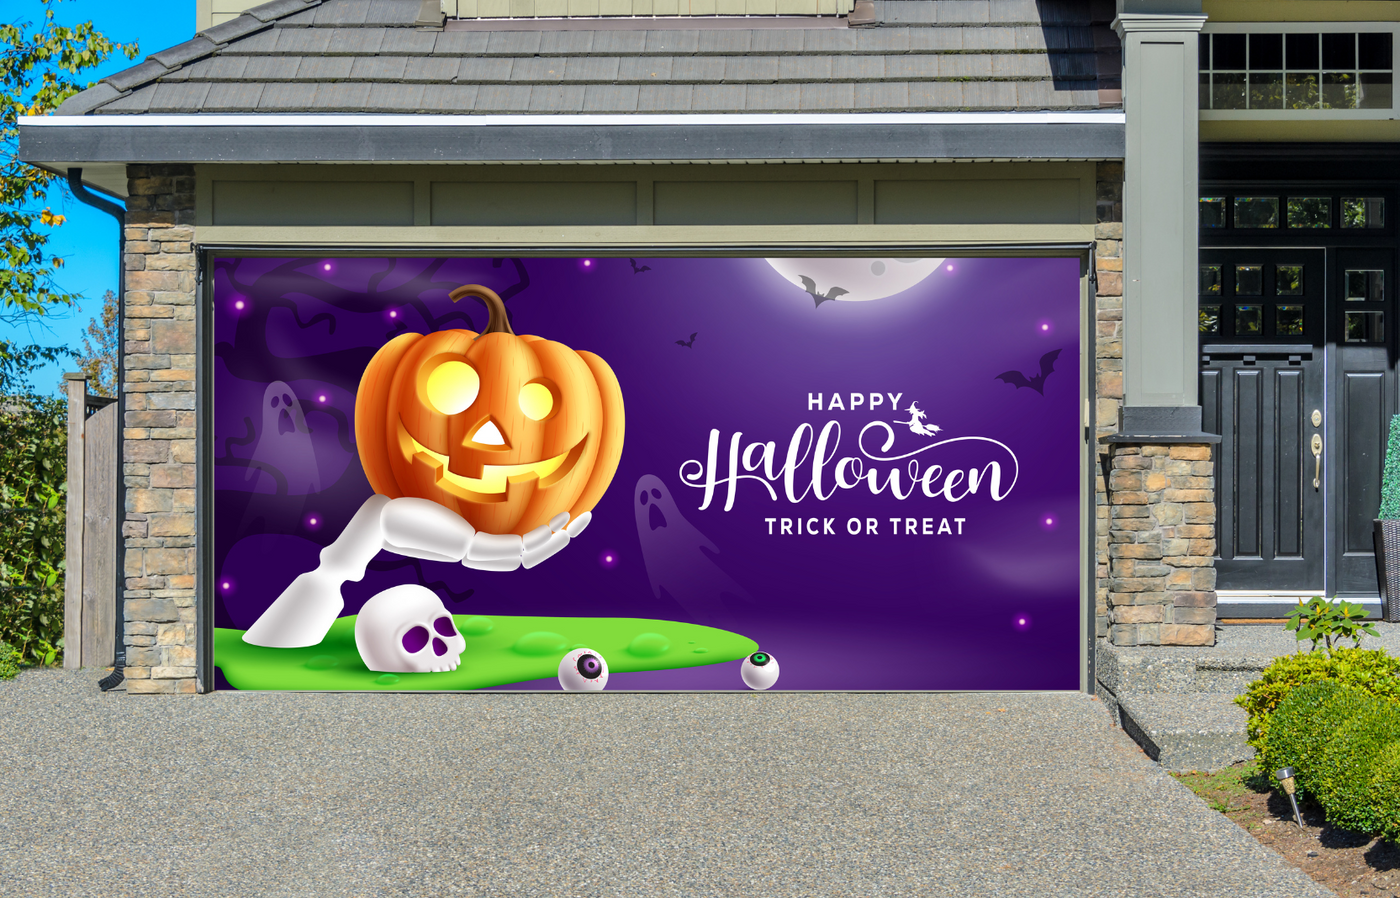 Halloween Trick Or Treat With Pumpkin Skull And Skeletal Hand For Horror Party Celebration Garage Door Cover Wrap Decoration